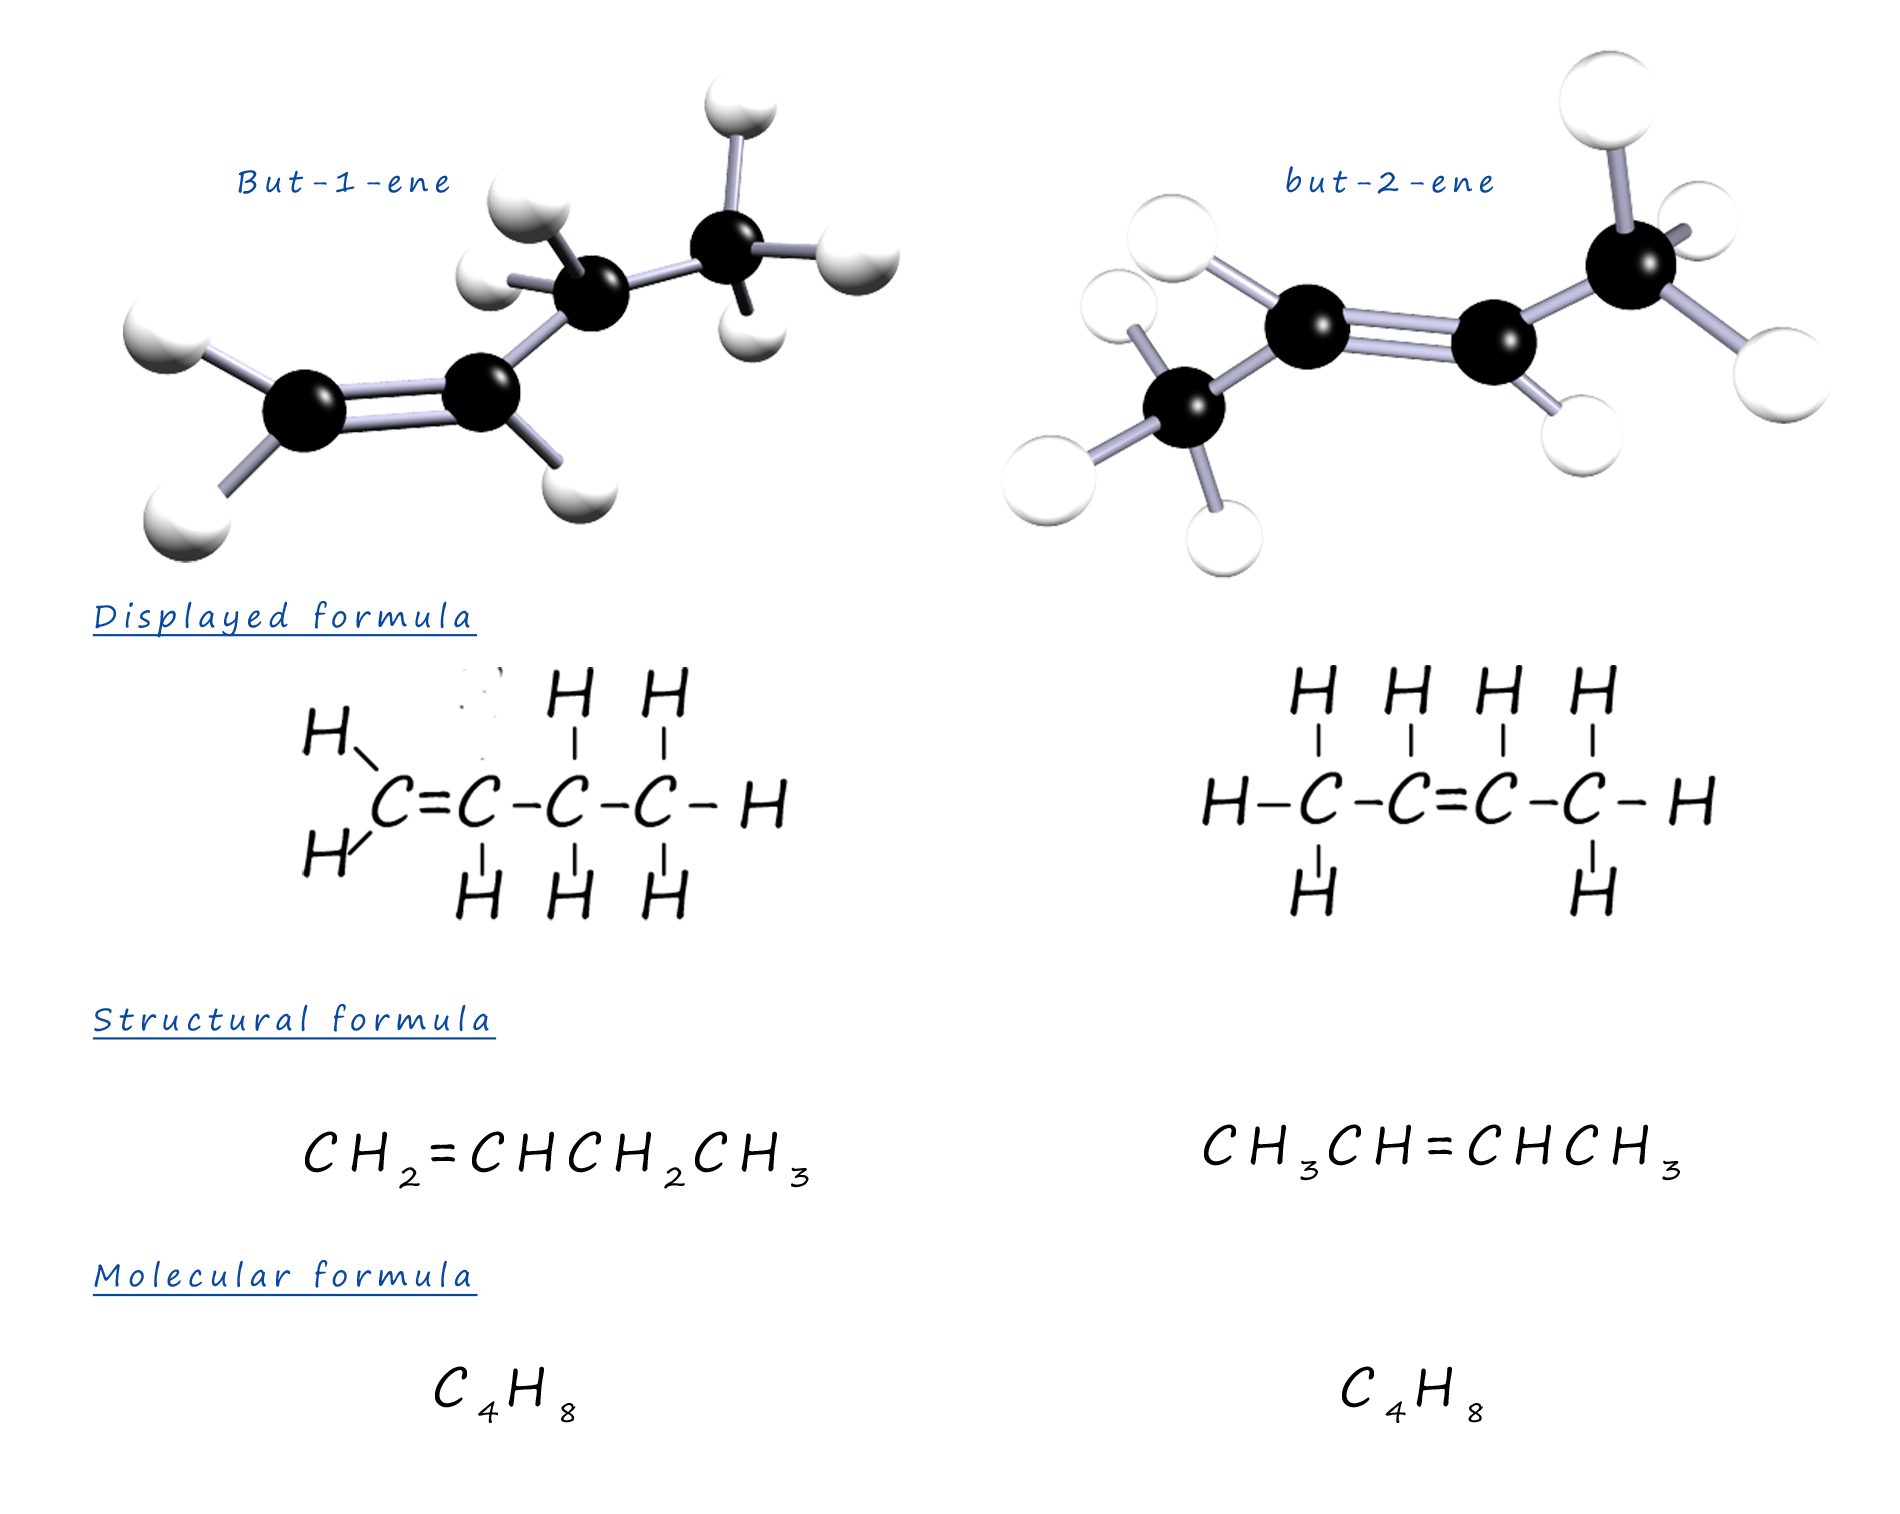 3d model, displayed formula of the position isomers of butene.